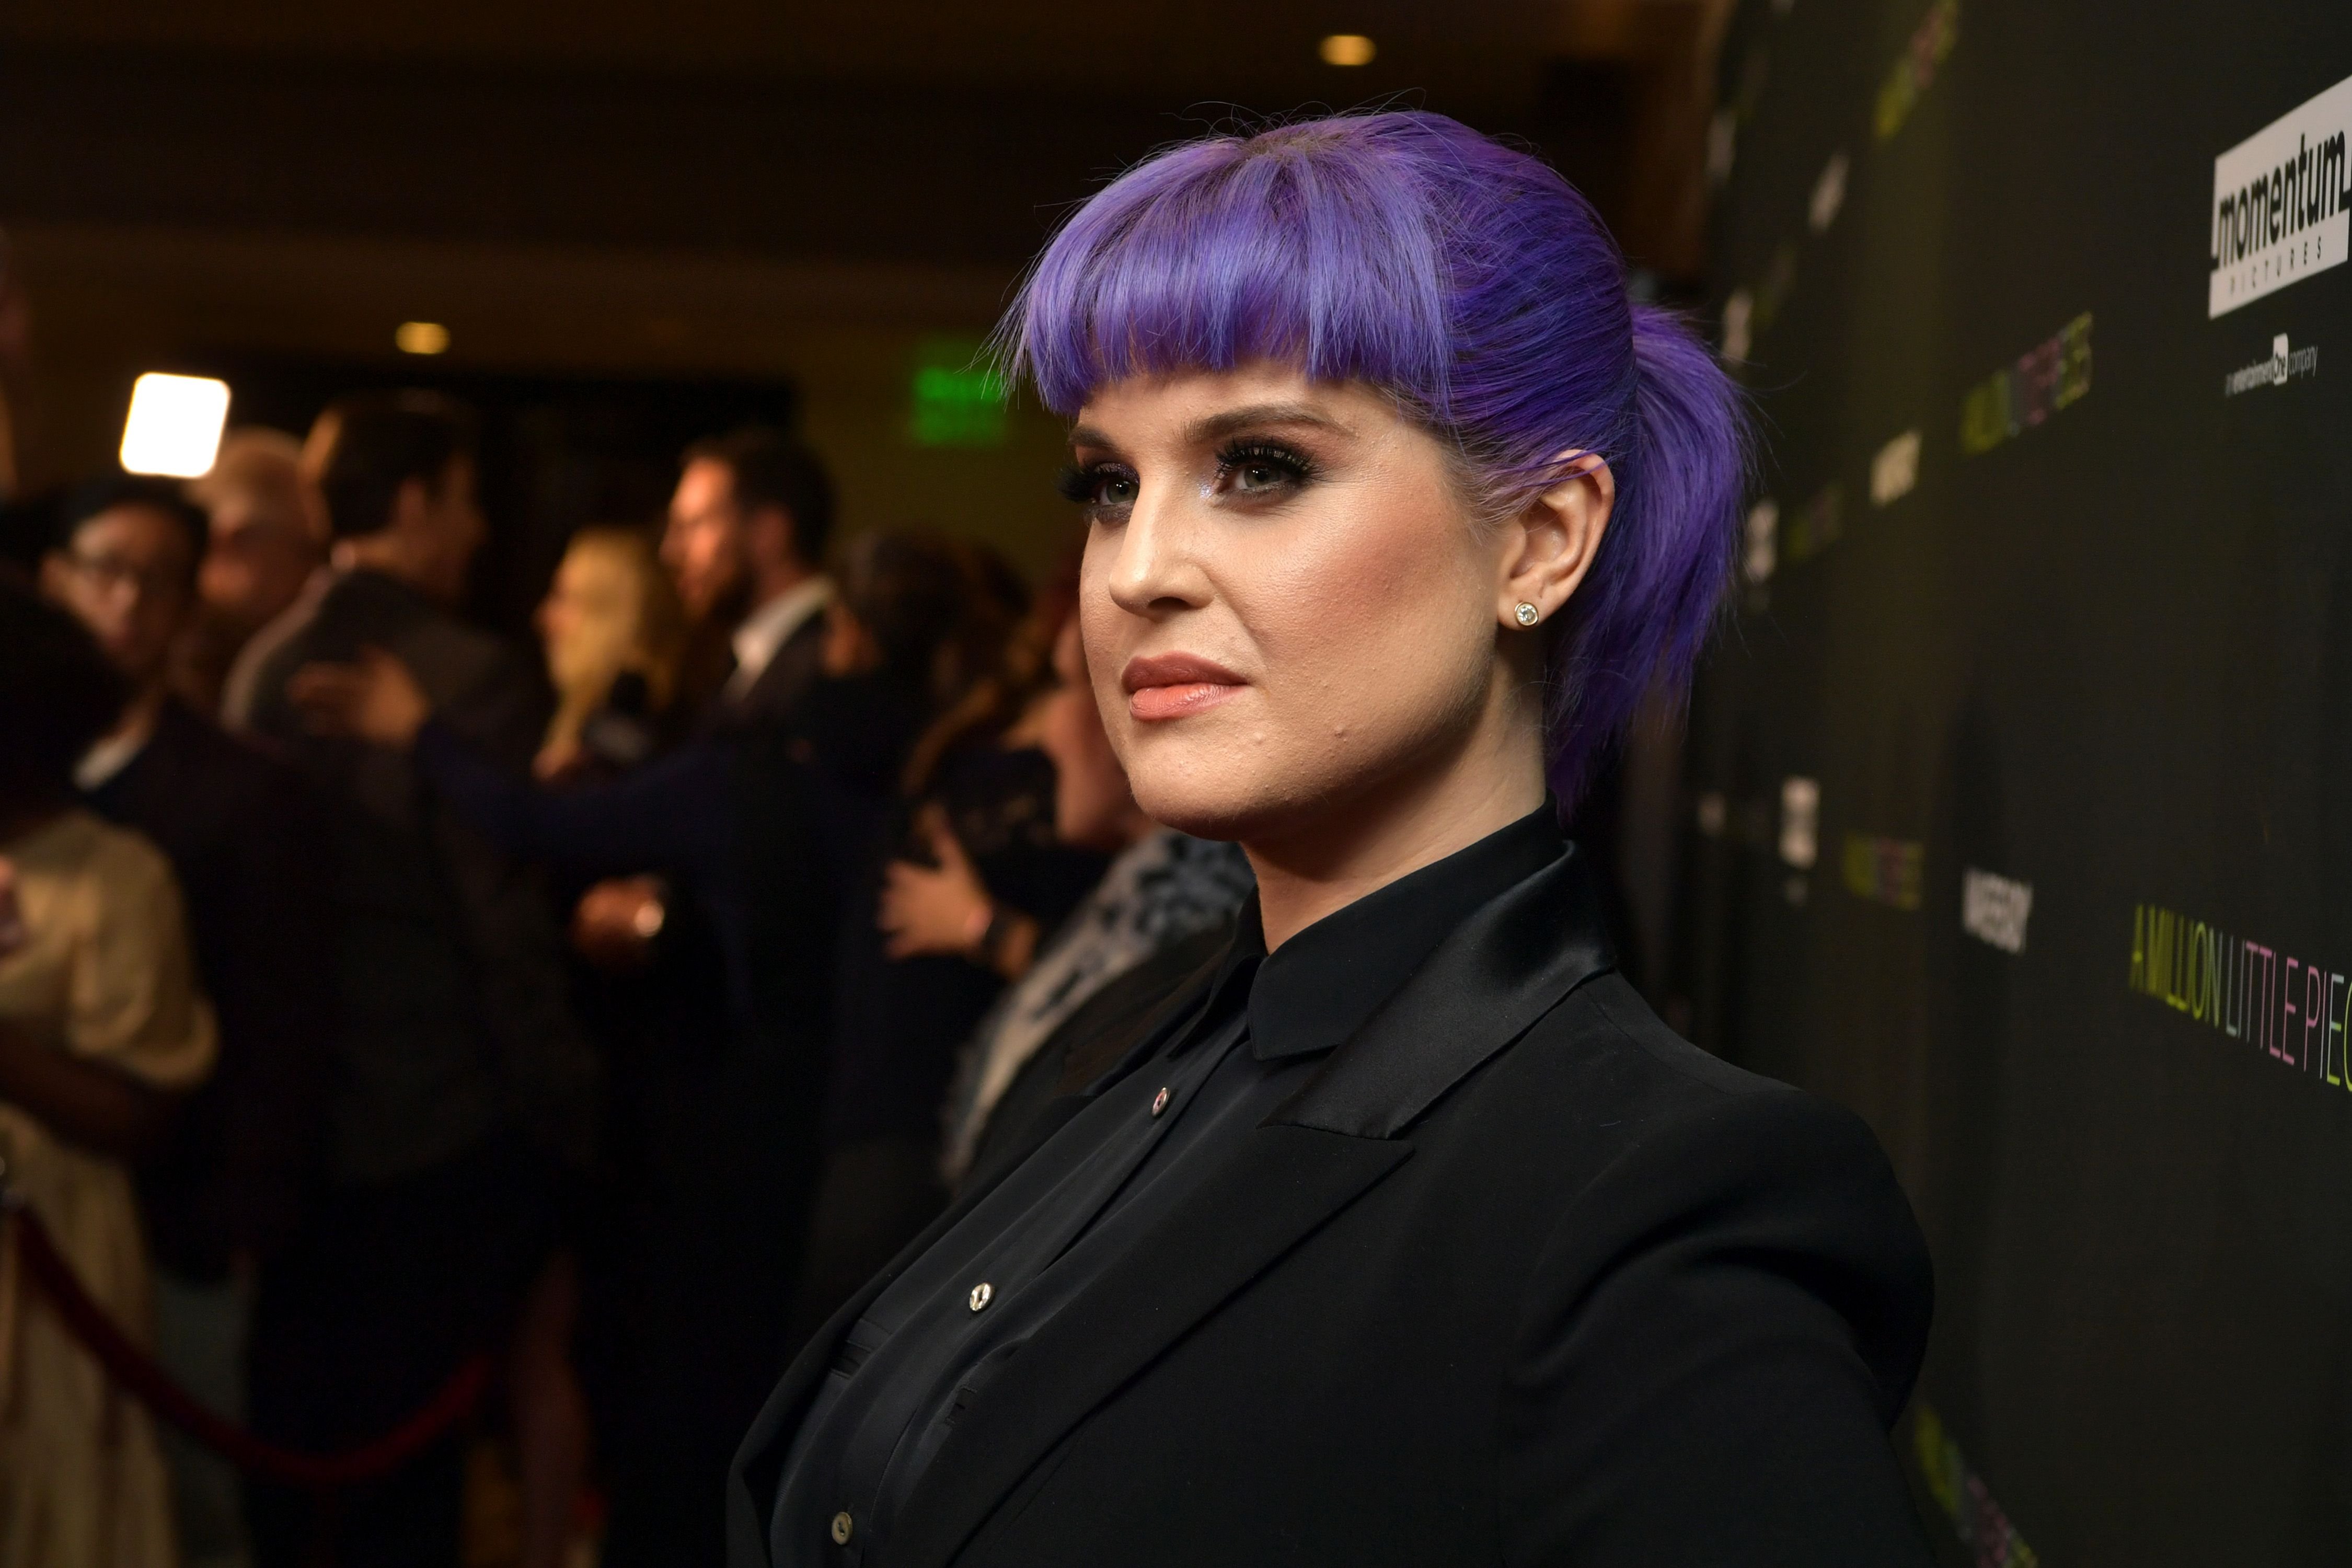 Kelly Osborne at the special screening of Momentum Pictures' "A Million Little Pieces" at The London Hotel on December 04, 2019 | Photo: Getty Images